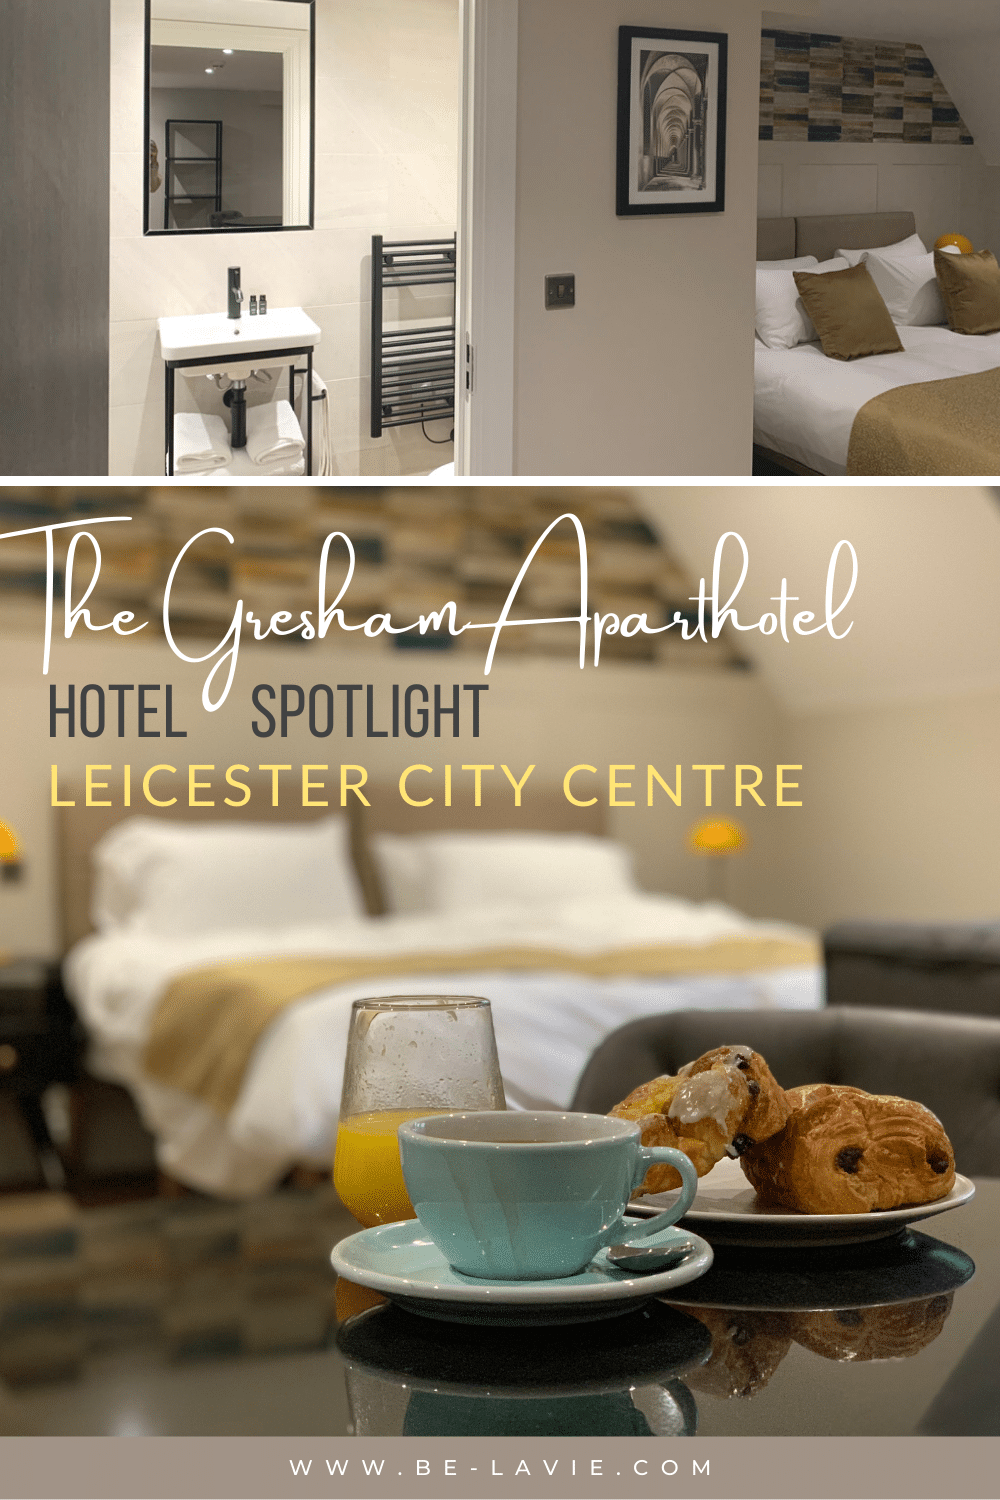 The Gresham Aparthotel: Luxury Serviced Apartments in Leicester Pinterest Pin